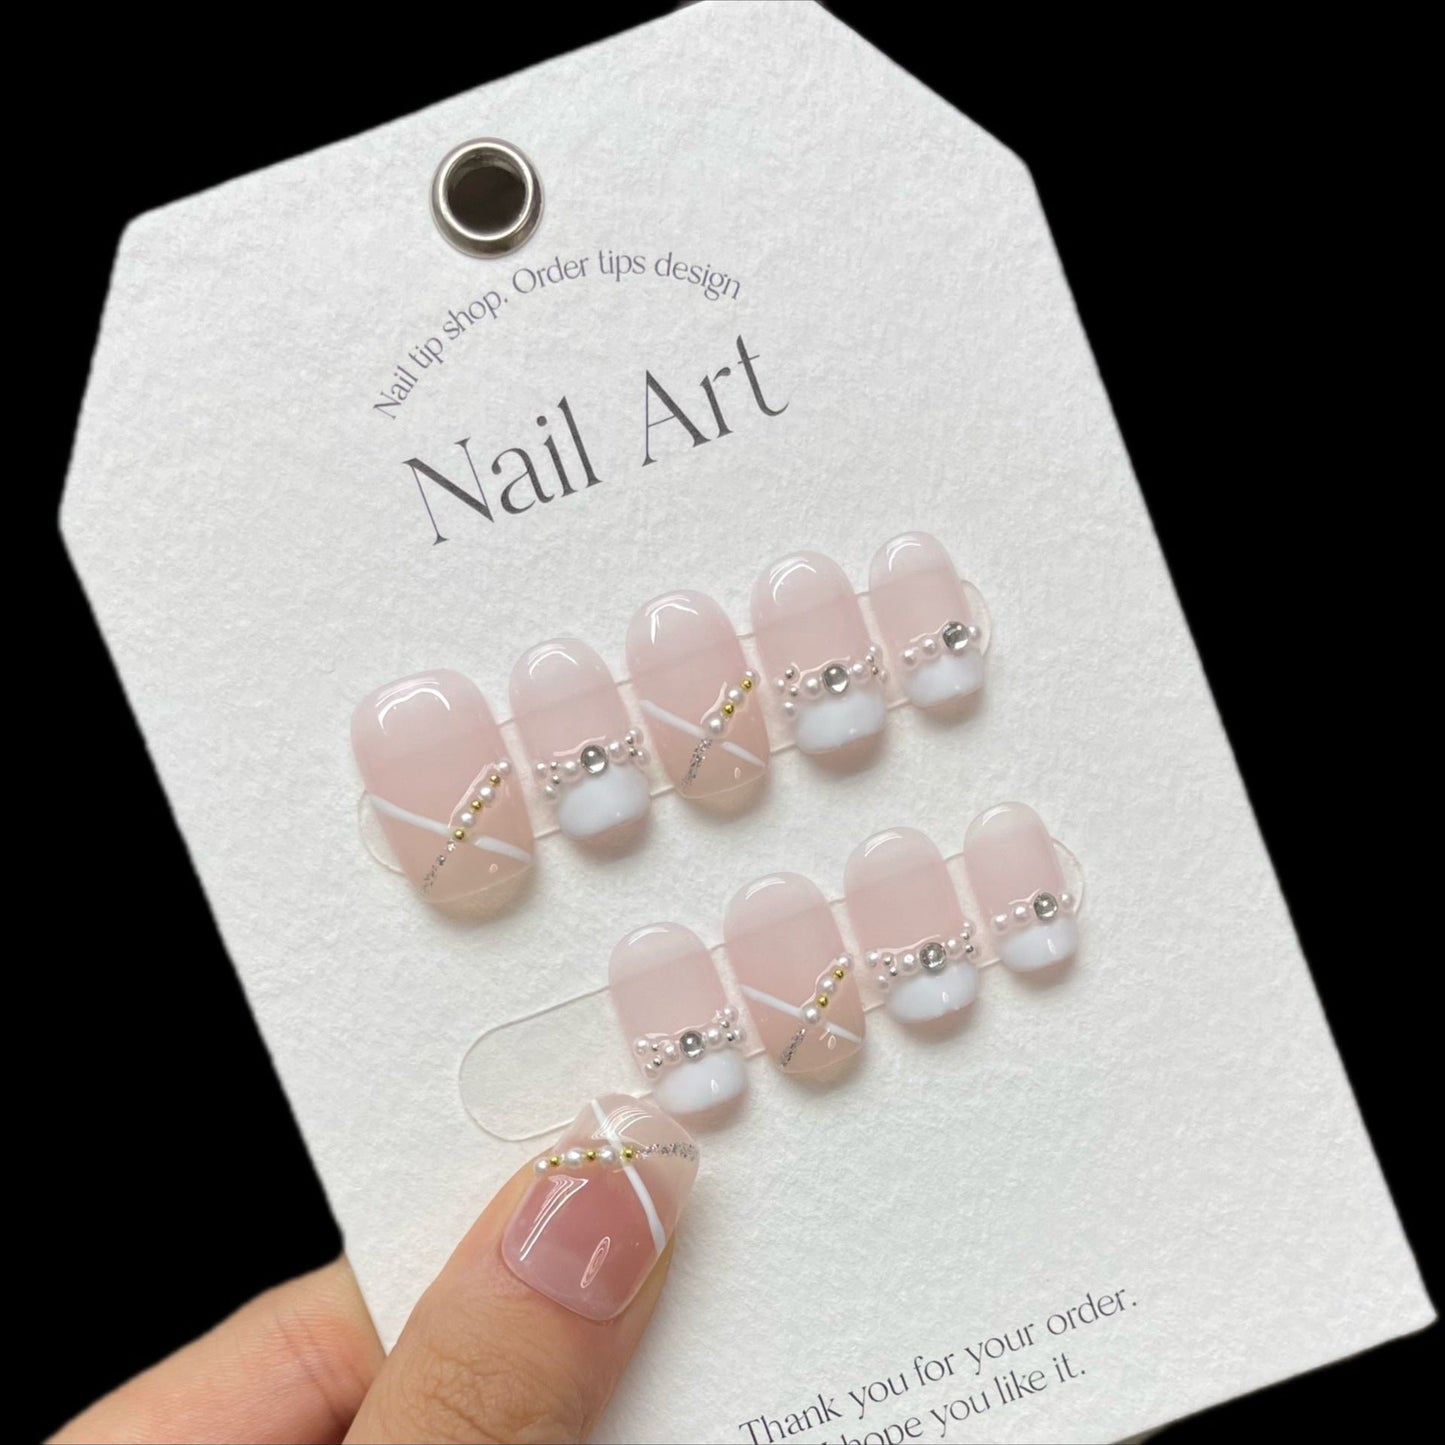 987 Gentle French style press on nails 100% handmade false nails white pink nude color